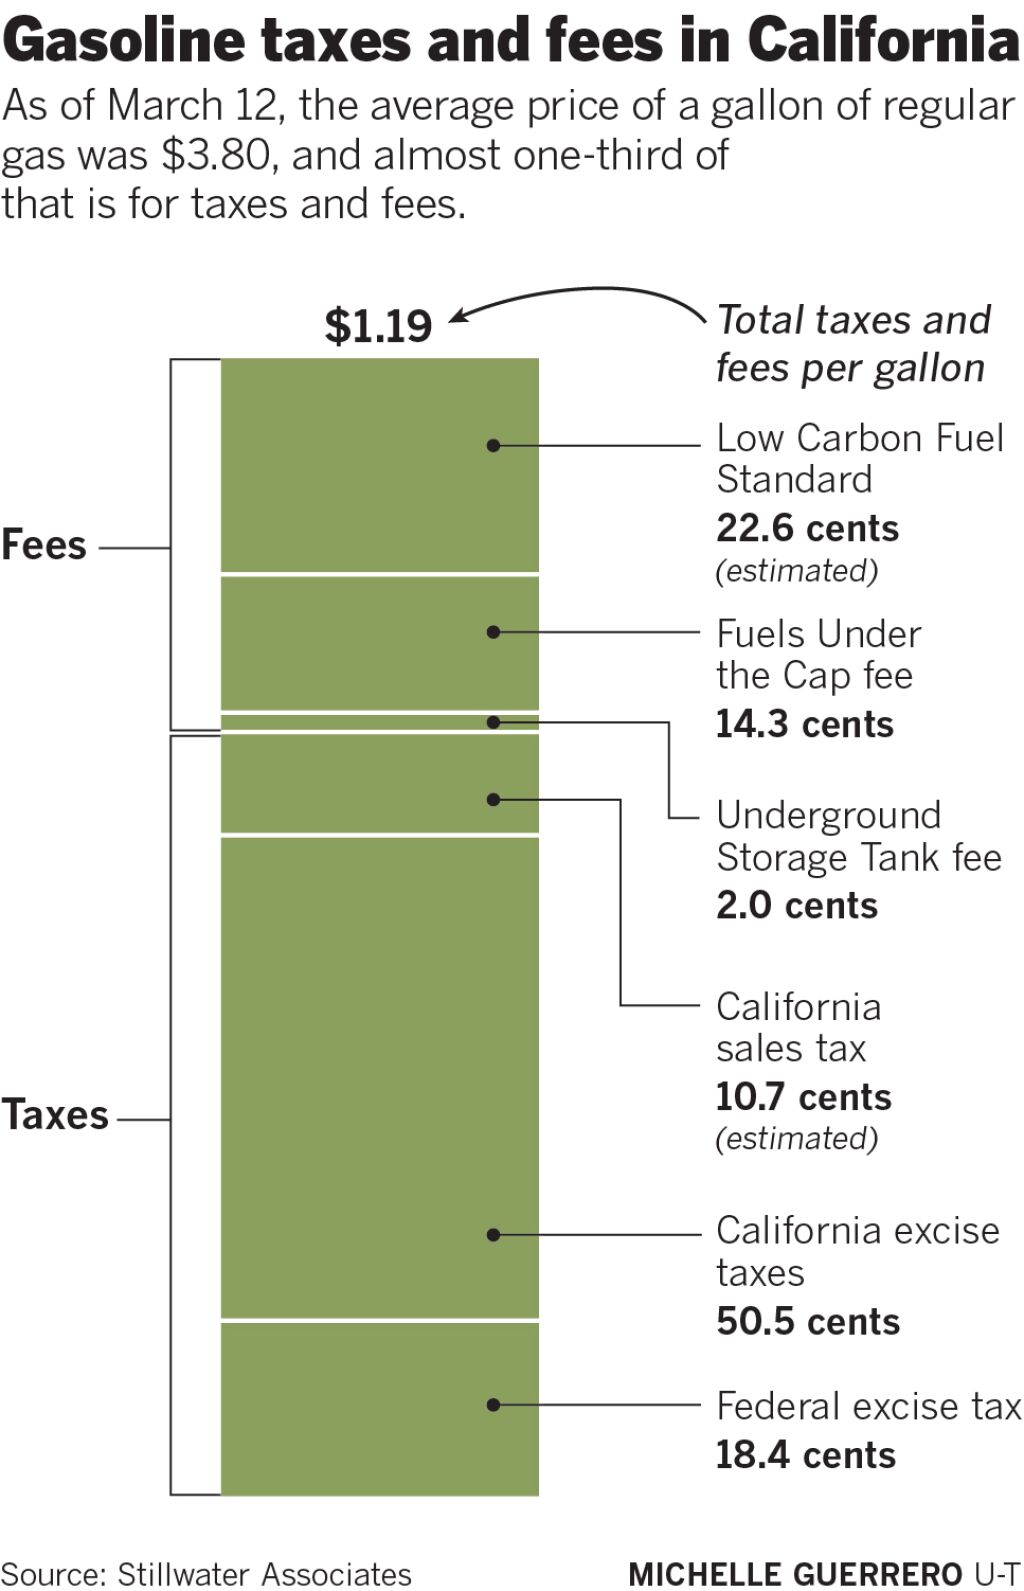 How much are you paying in taxes and fees for gasoline in California